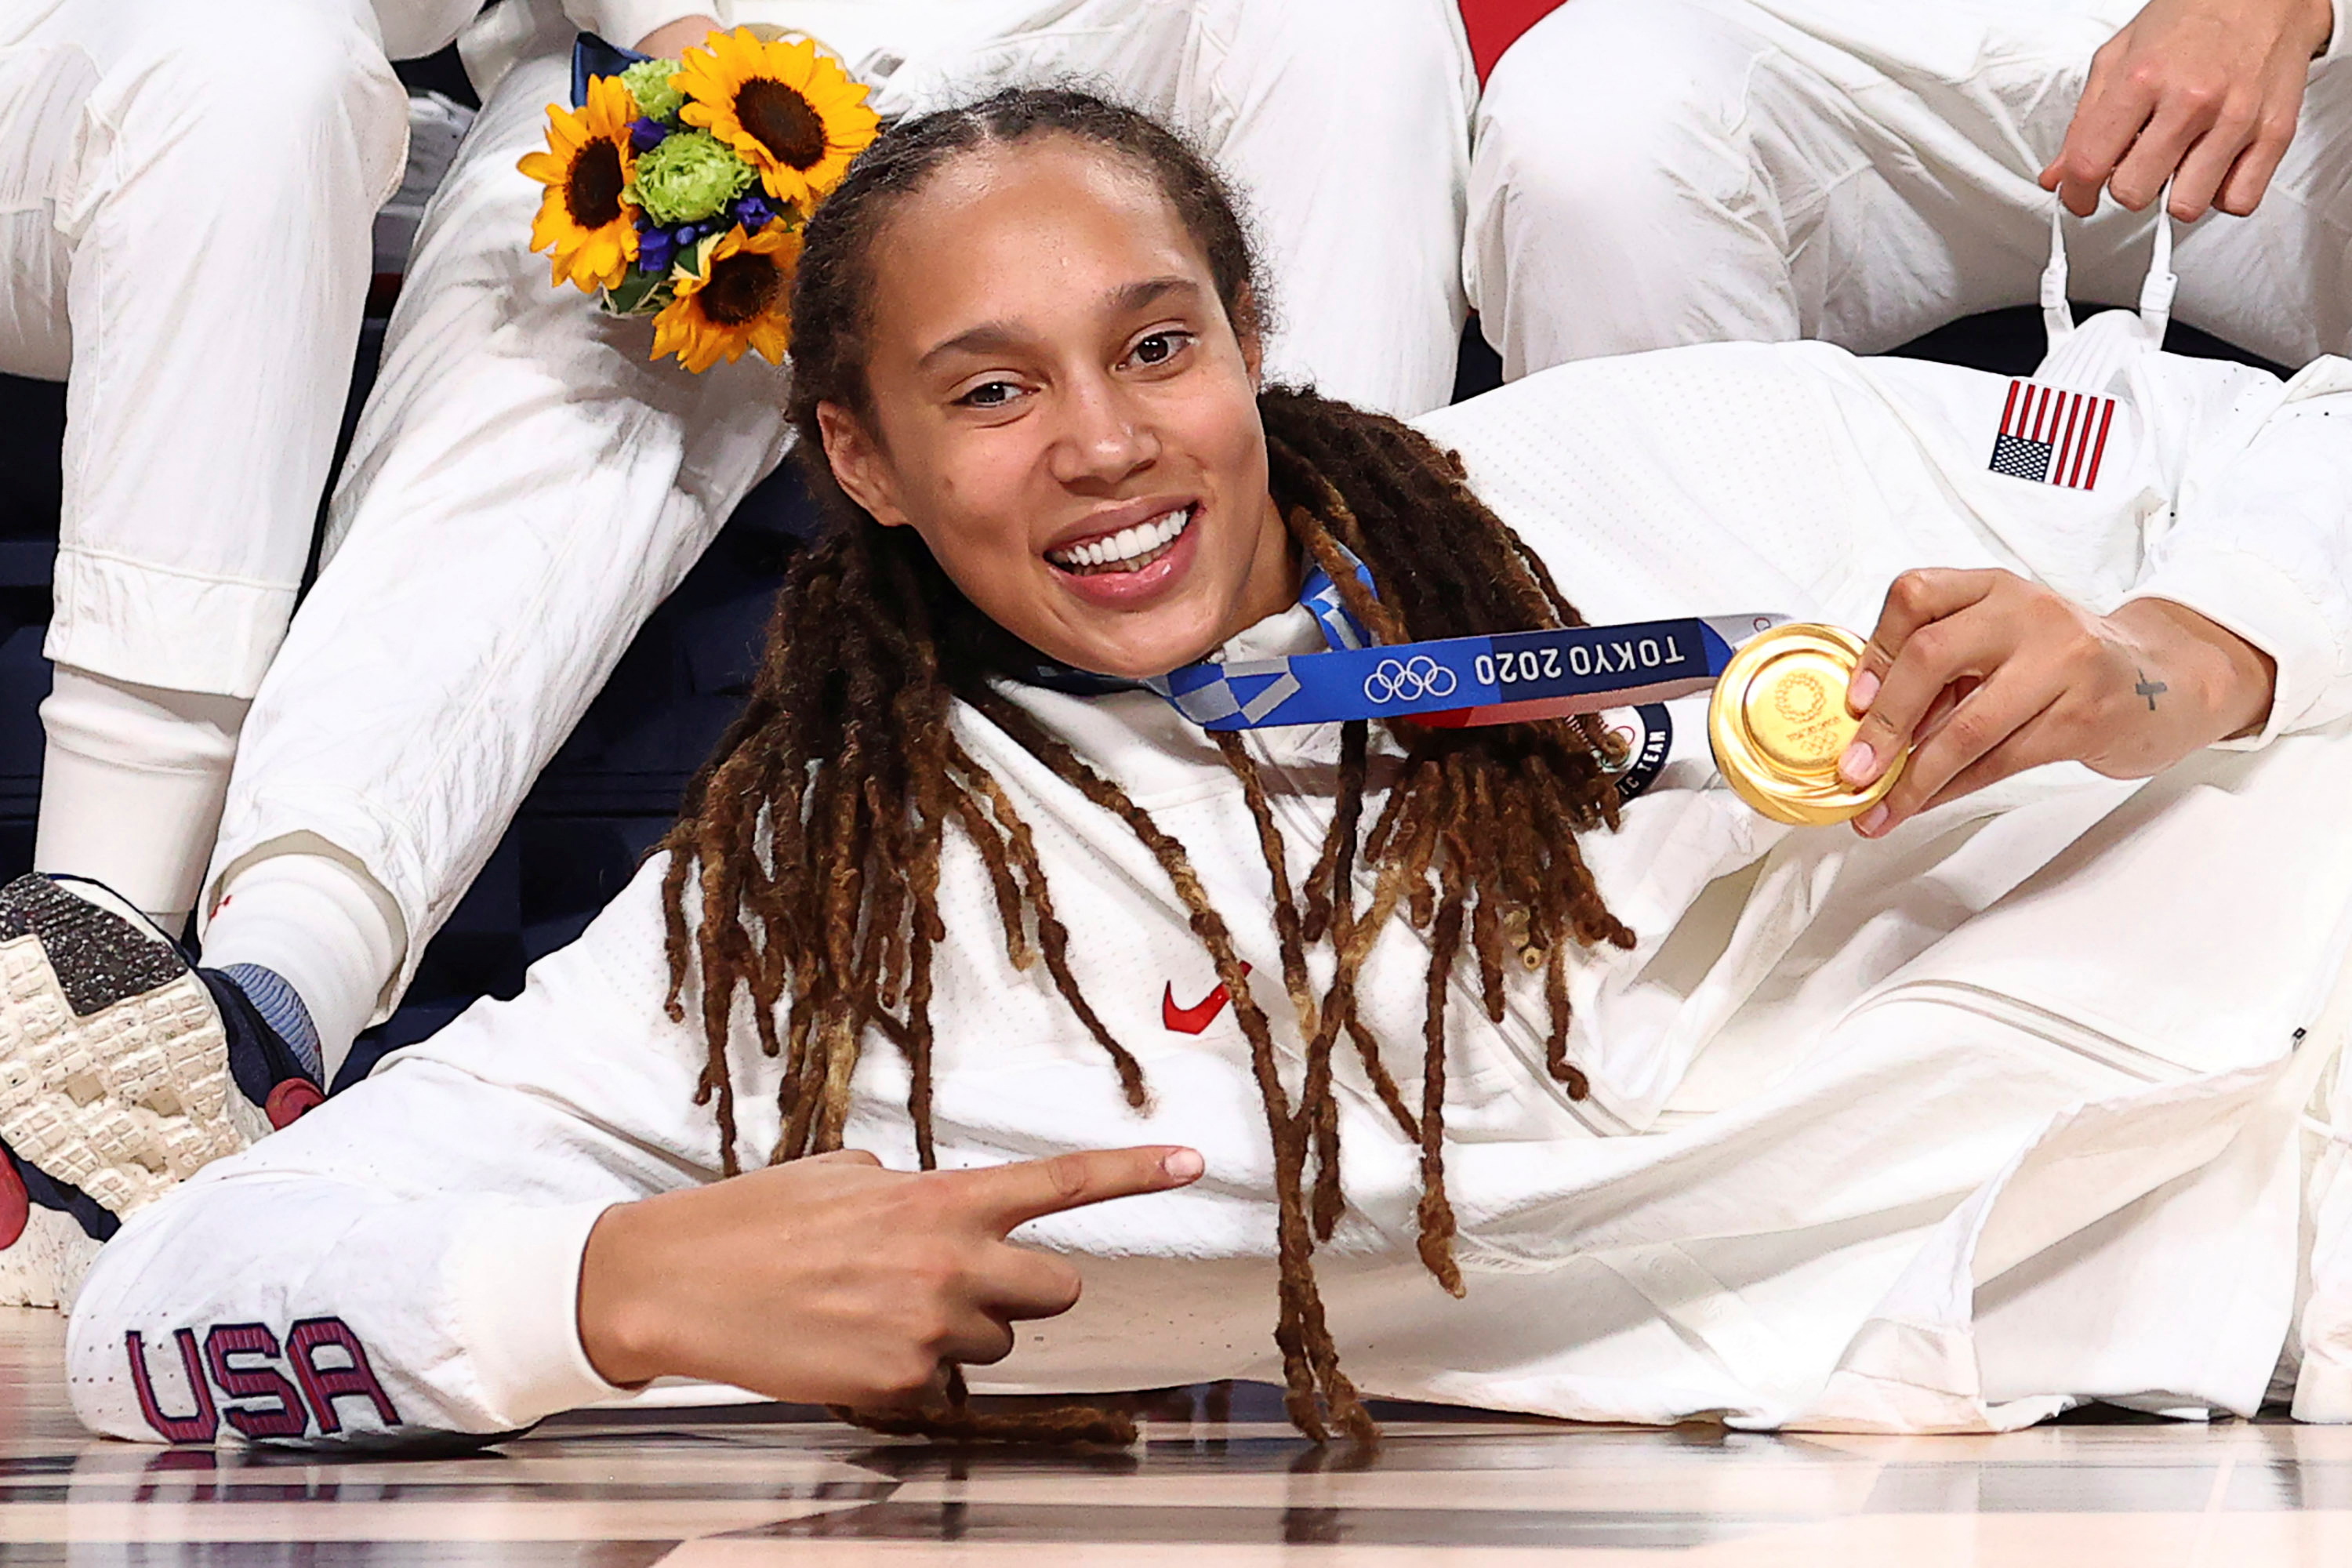 Brittney Griner of the United States poses for a photograph with her gold medal in Women's Basketball at the Tokyo 2020 Summer Olympics at the Saitama Super Arena in Saitama, Japan, August 8, 2021.  Picture taken August 8, 2021.   REUTERS/Brian Snyder